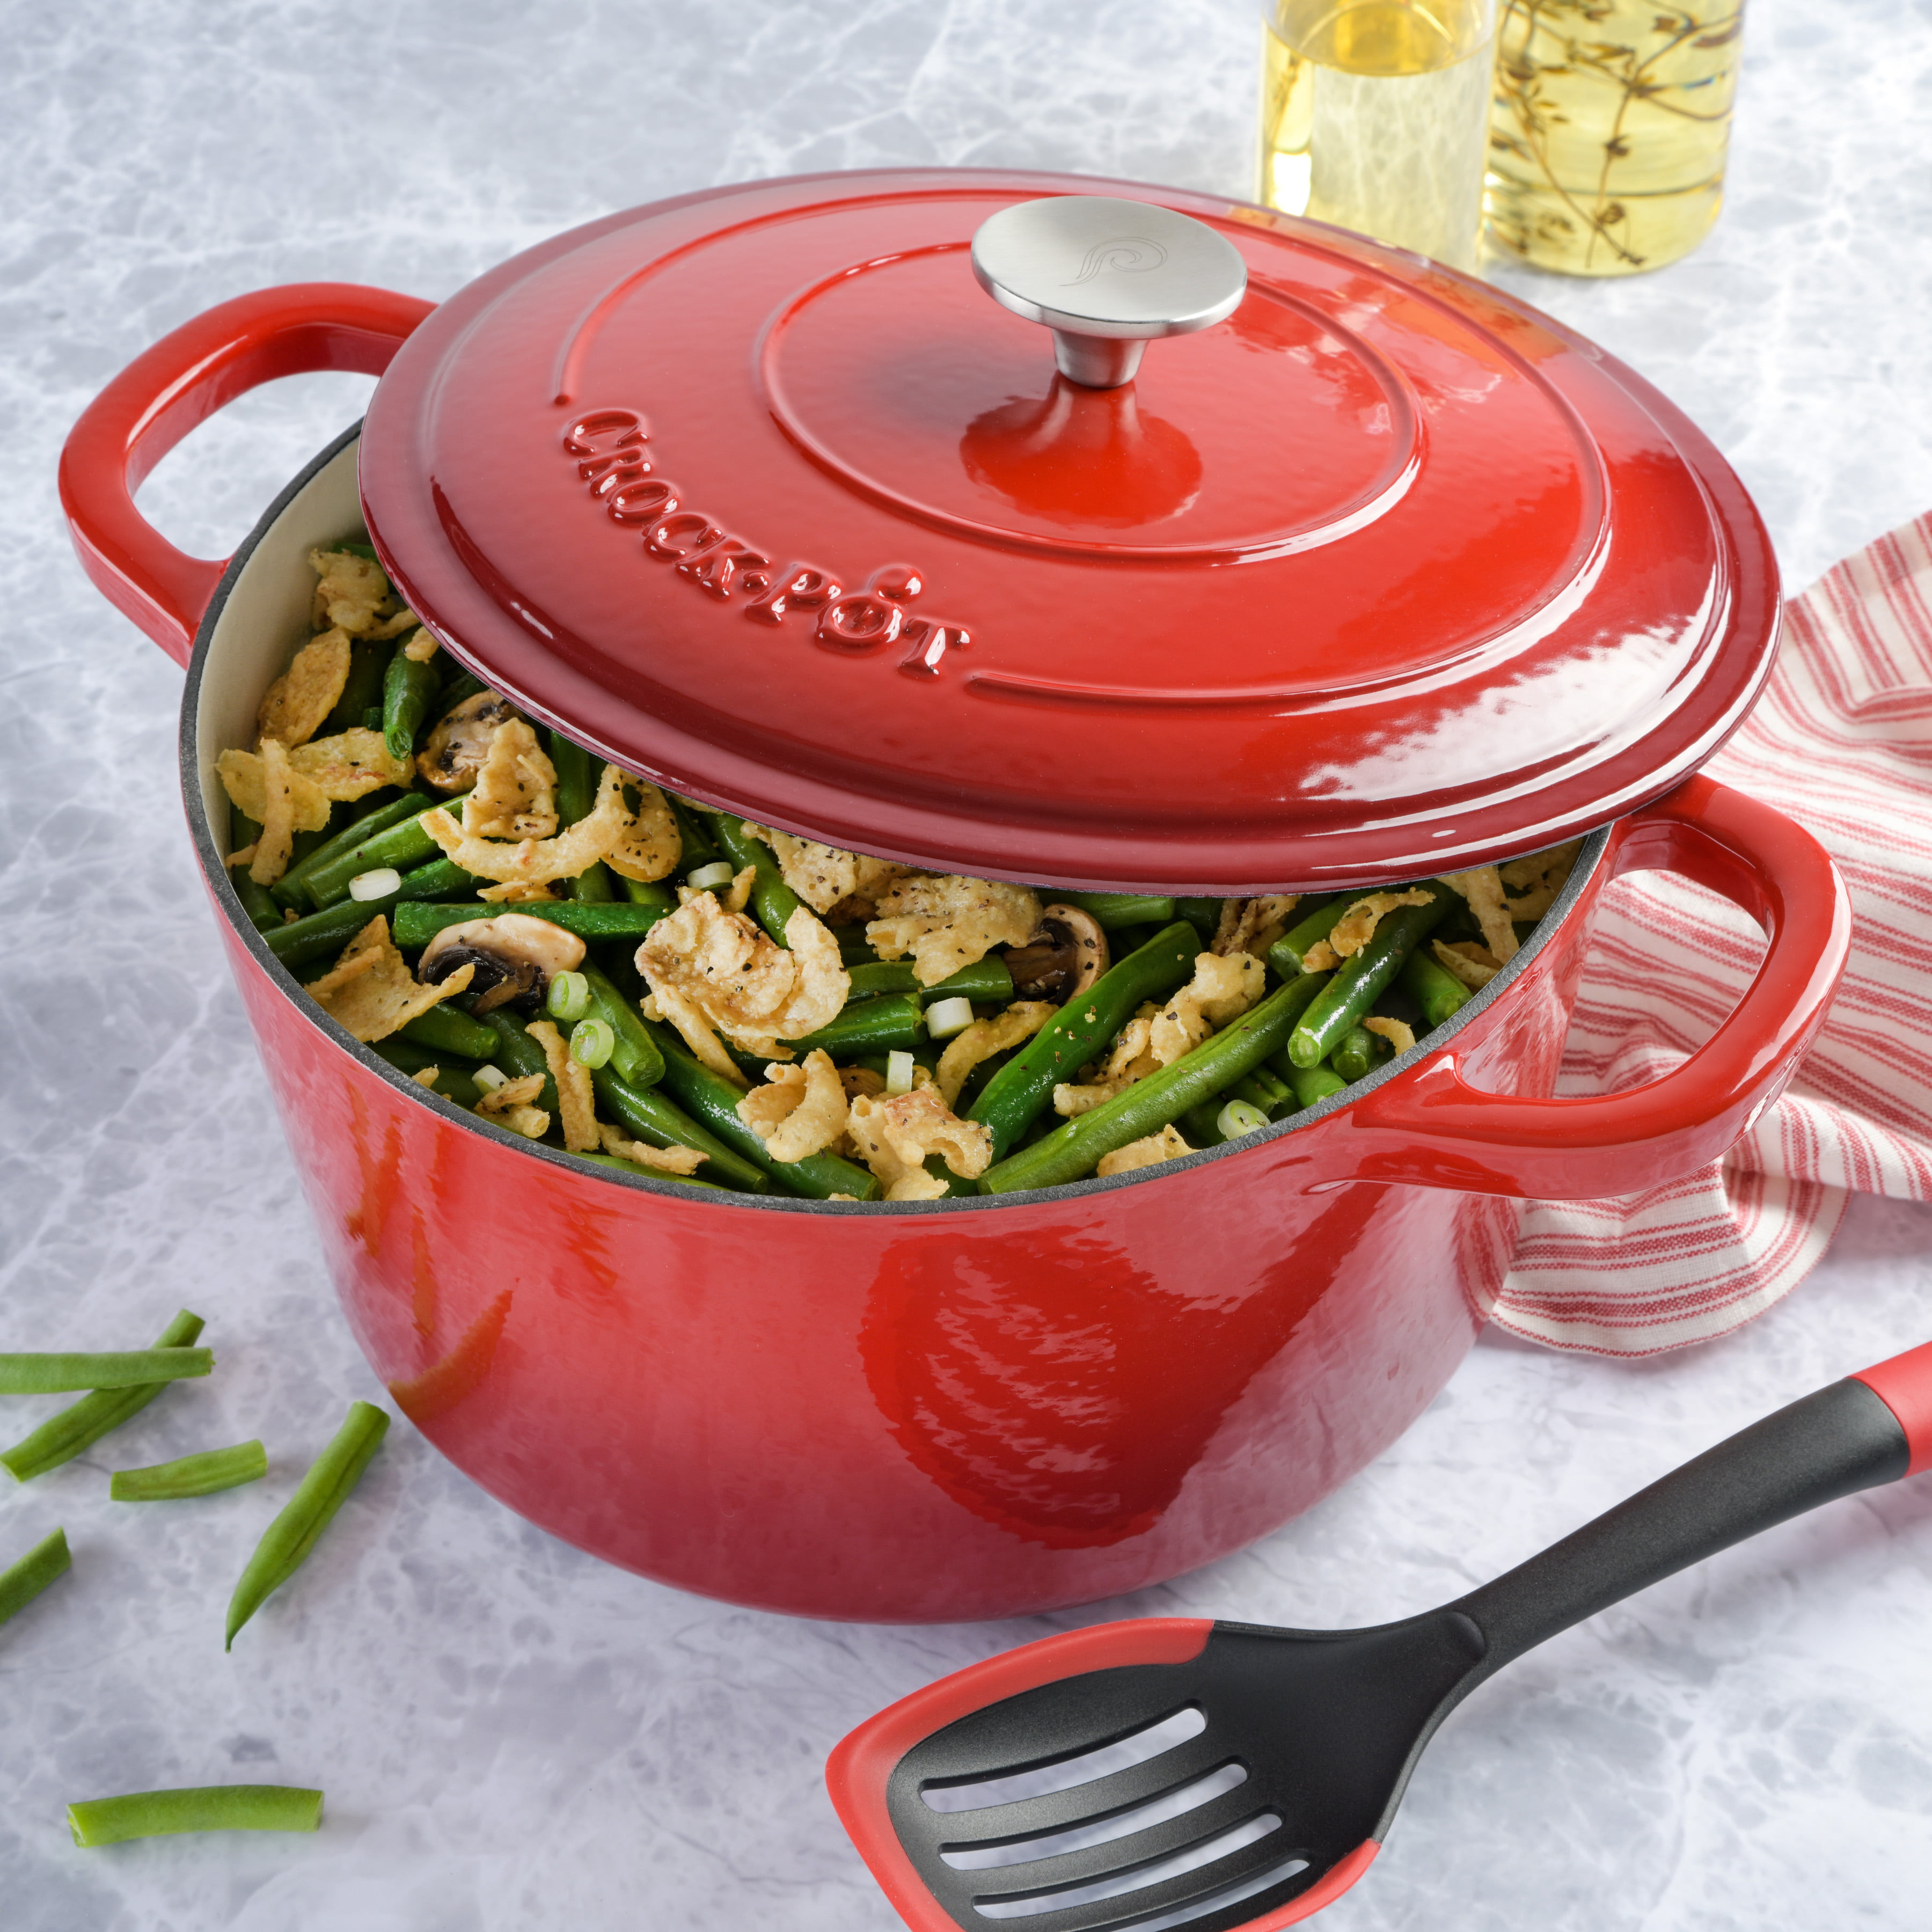 Crock-Pot 7 Qt. Red Oval Enamel Cast Iron Covered Dutch Oven Slow Cooker  69147.02 - The Home Depot